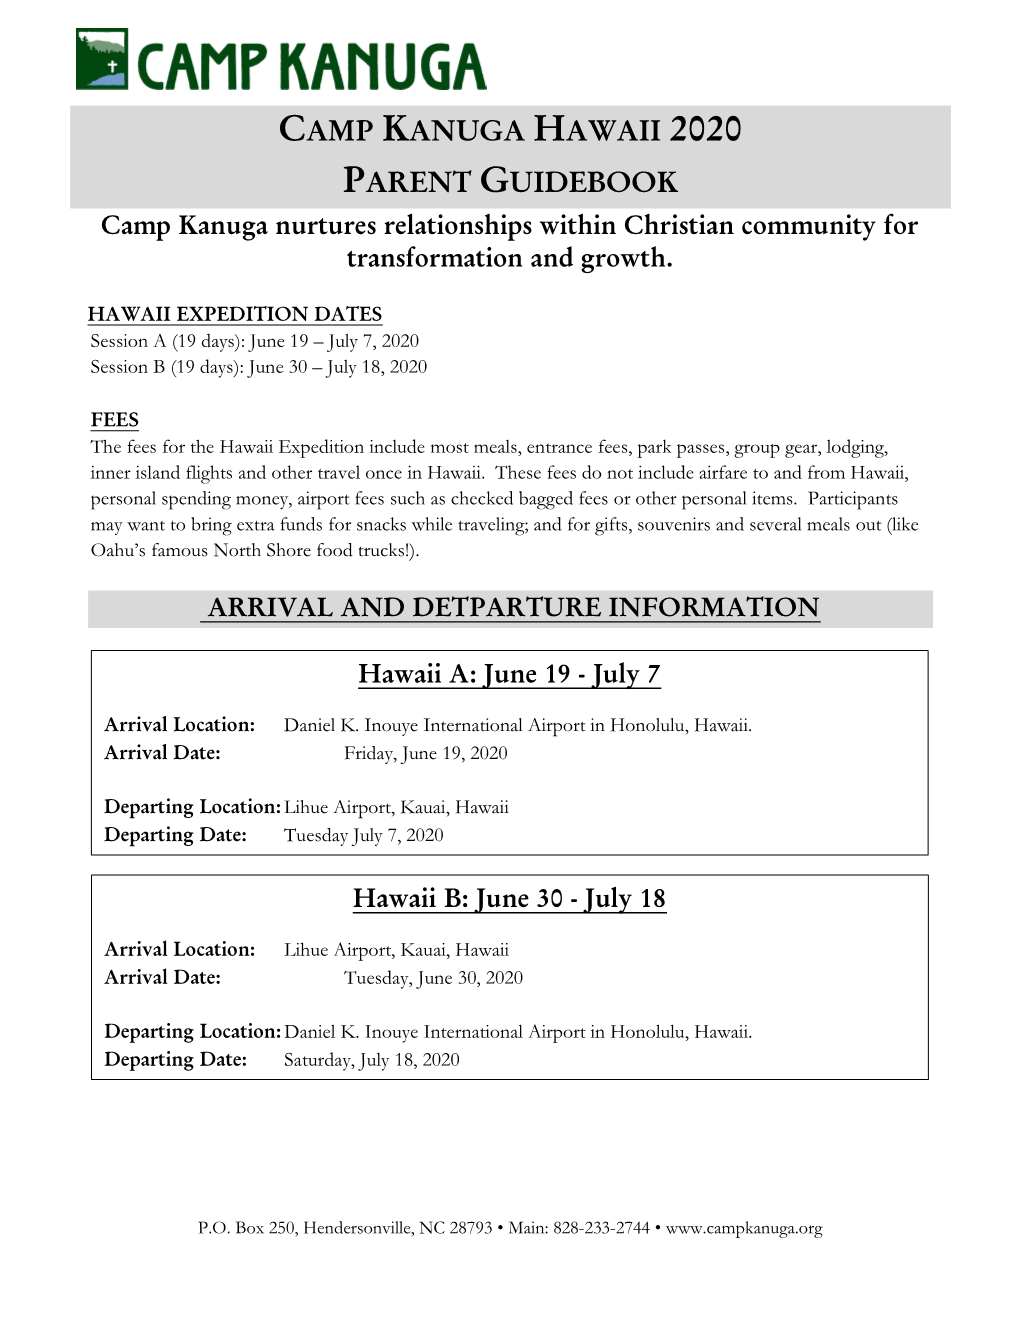 CAMP KANUGA HAWAII 2020 PARENT GUIDEBOOK Camp Kanuga Nurtures Relationships Within Christian Community for Transformation and Growth